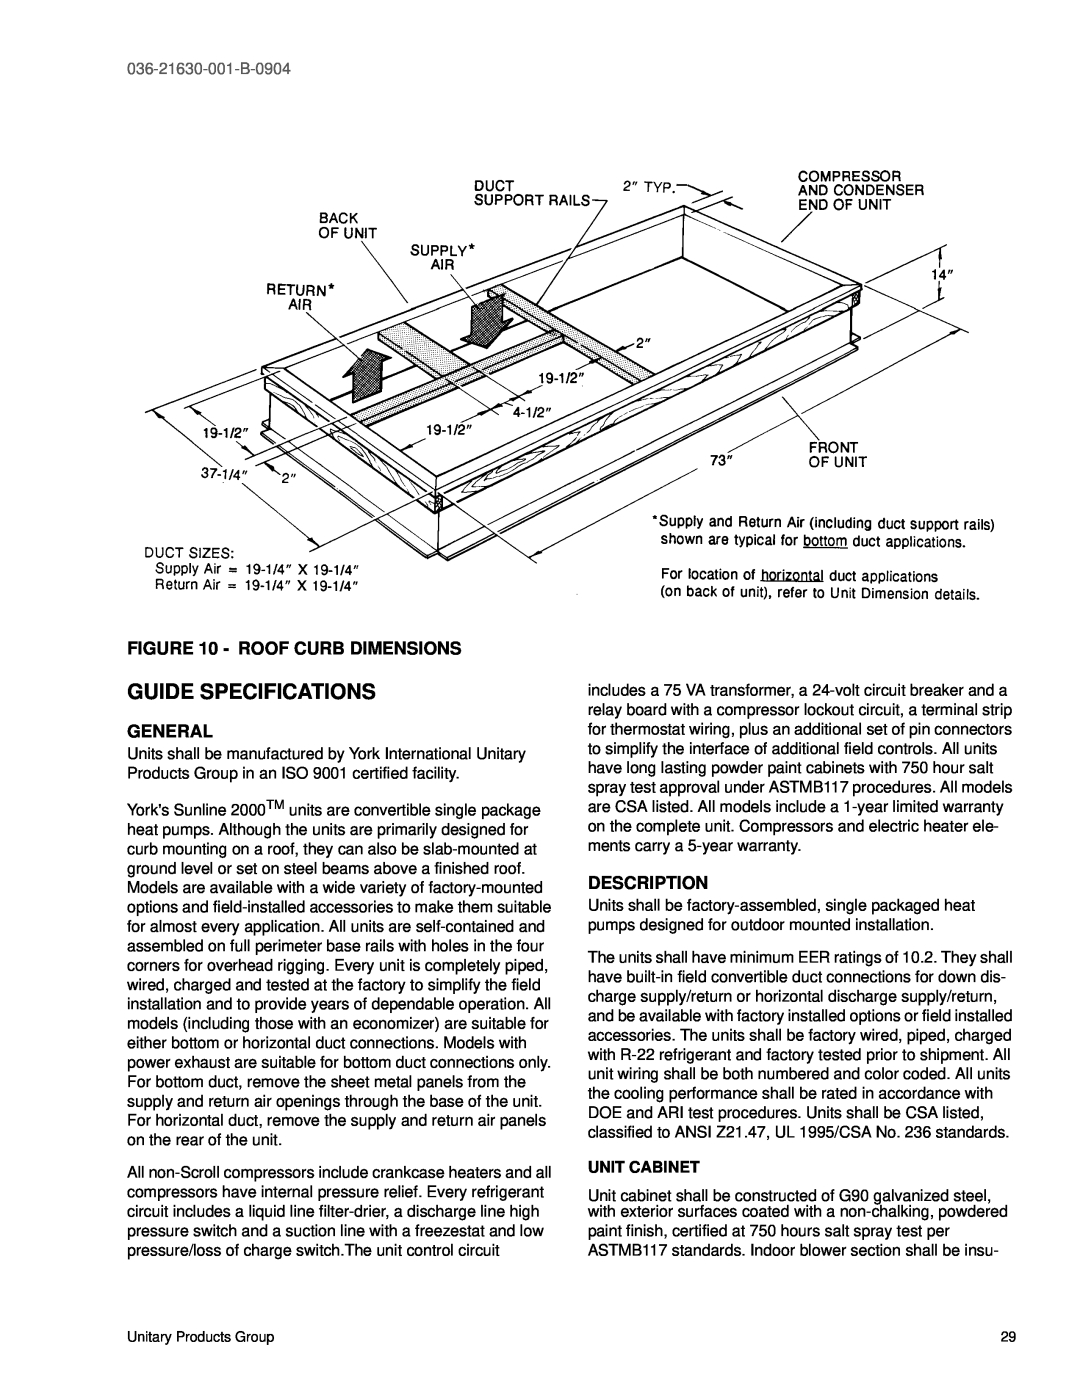 York BP 072 warranty Guide Specifications, Roof Curb Dimensions, General, Description, 036-21630-001-B-0904 